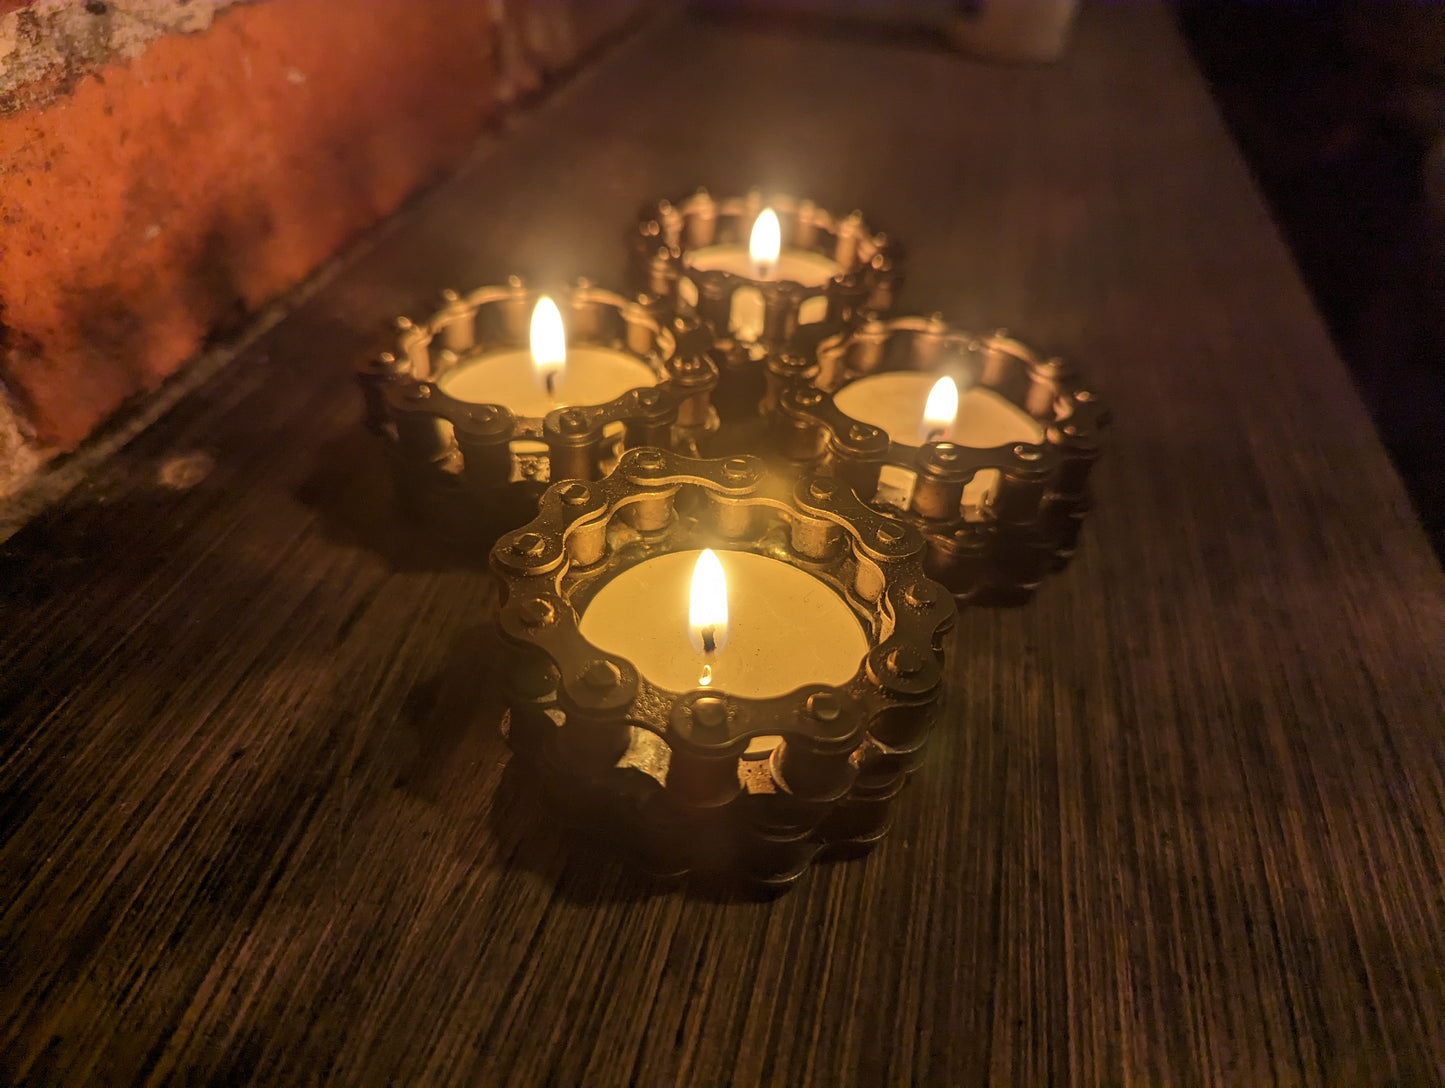 Locally Handmade Industrial Tealight Candle Holders - Set of 4